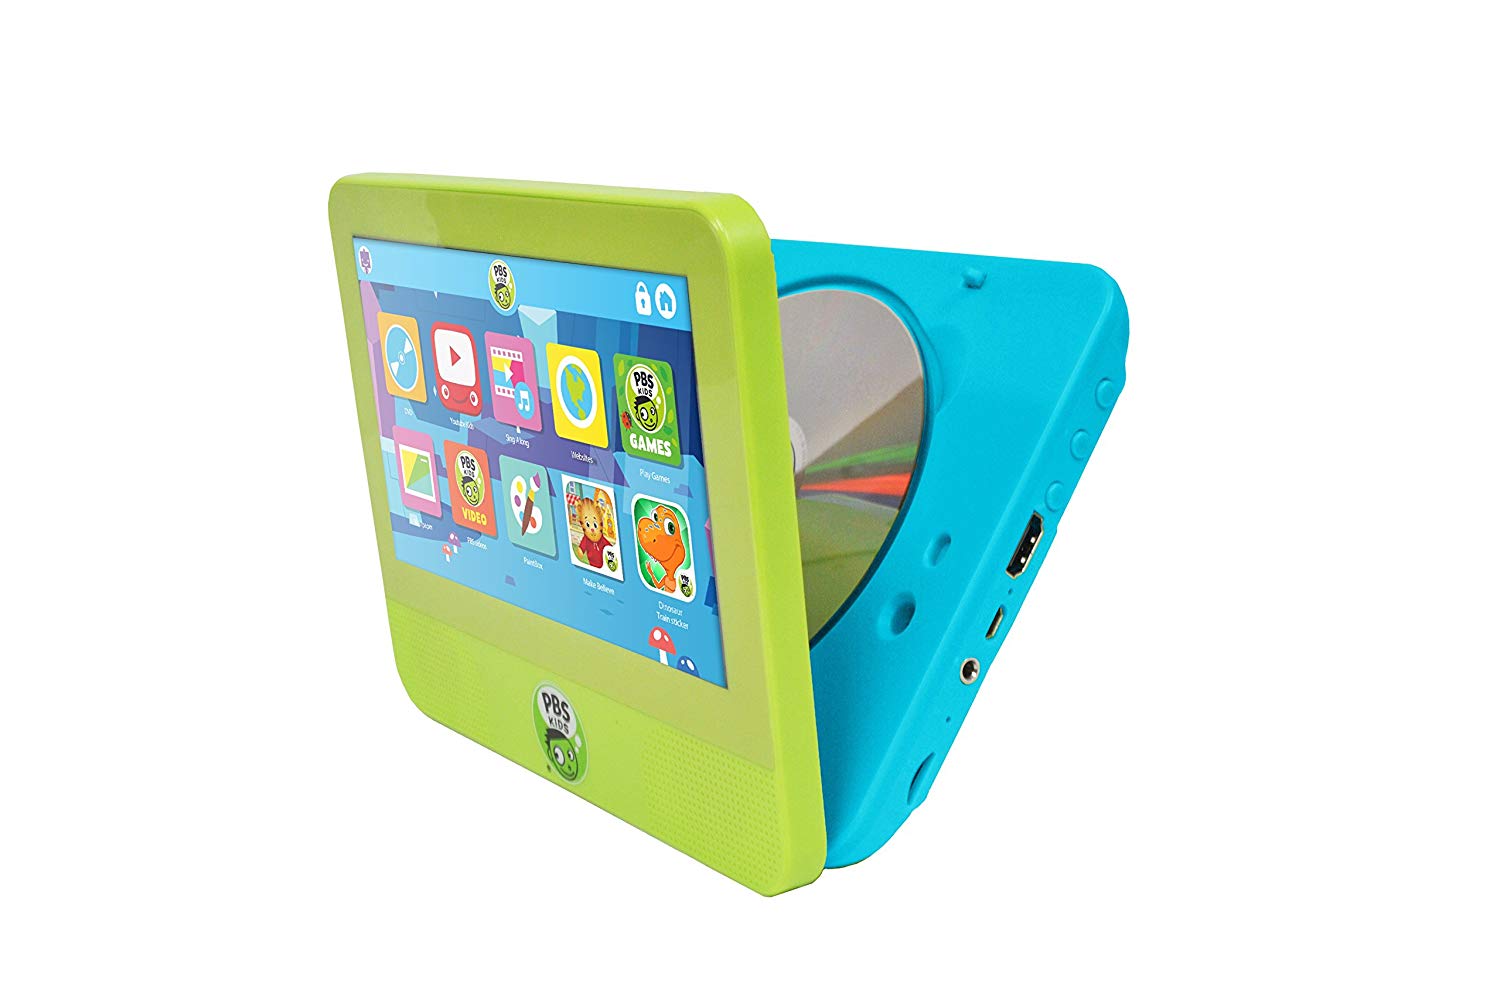 PBS KIDS Playtime Tablet DVD Player Android 7.0 Nougat 7" Kid Safe Tablet DVD Player Ages 2+ - image 4 of 8